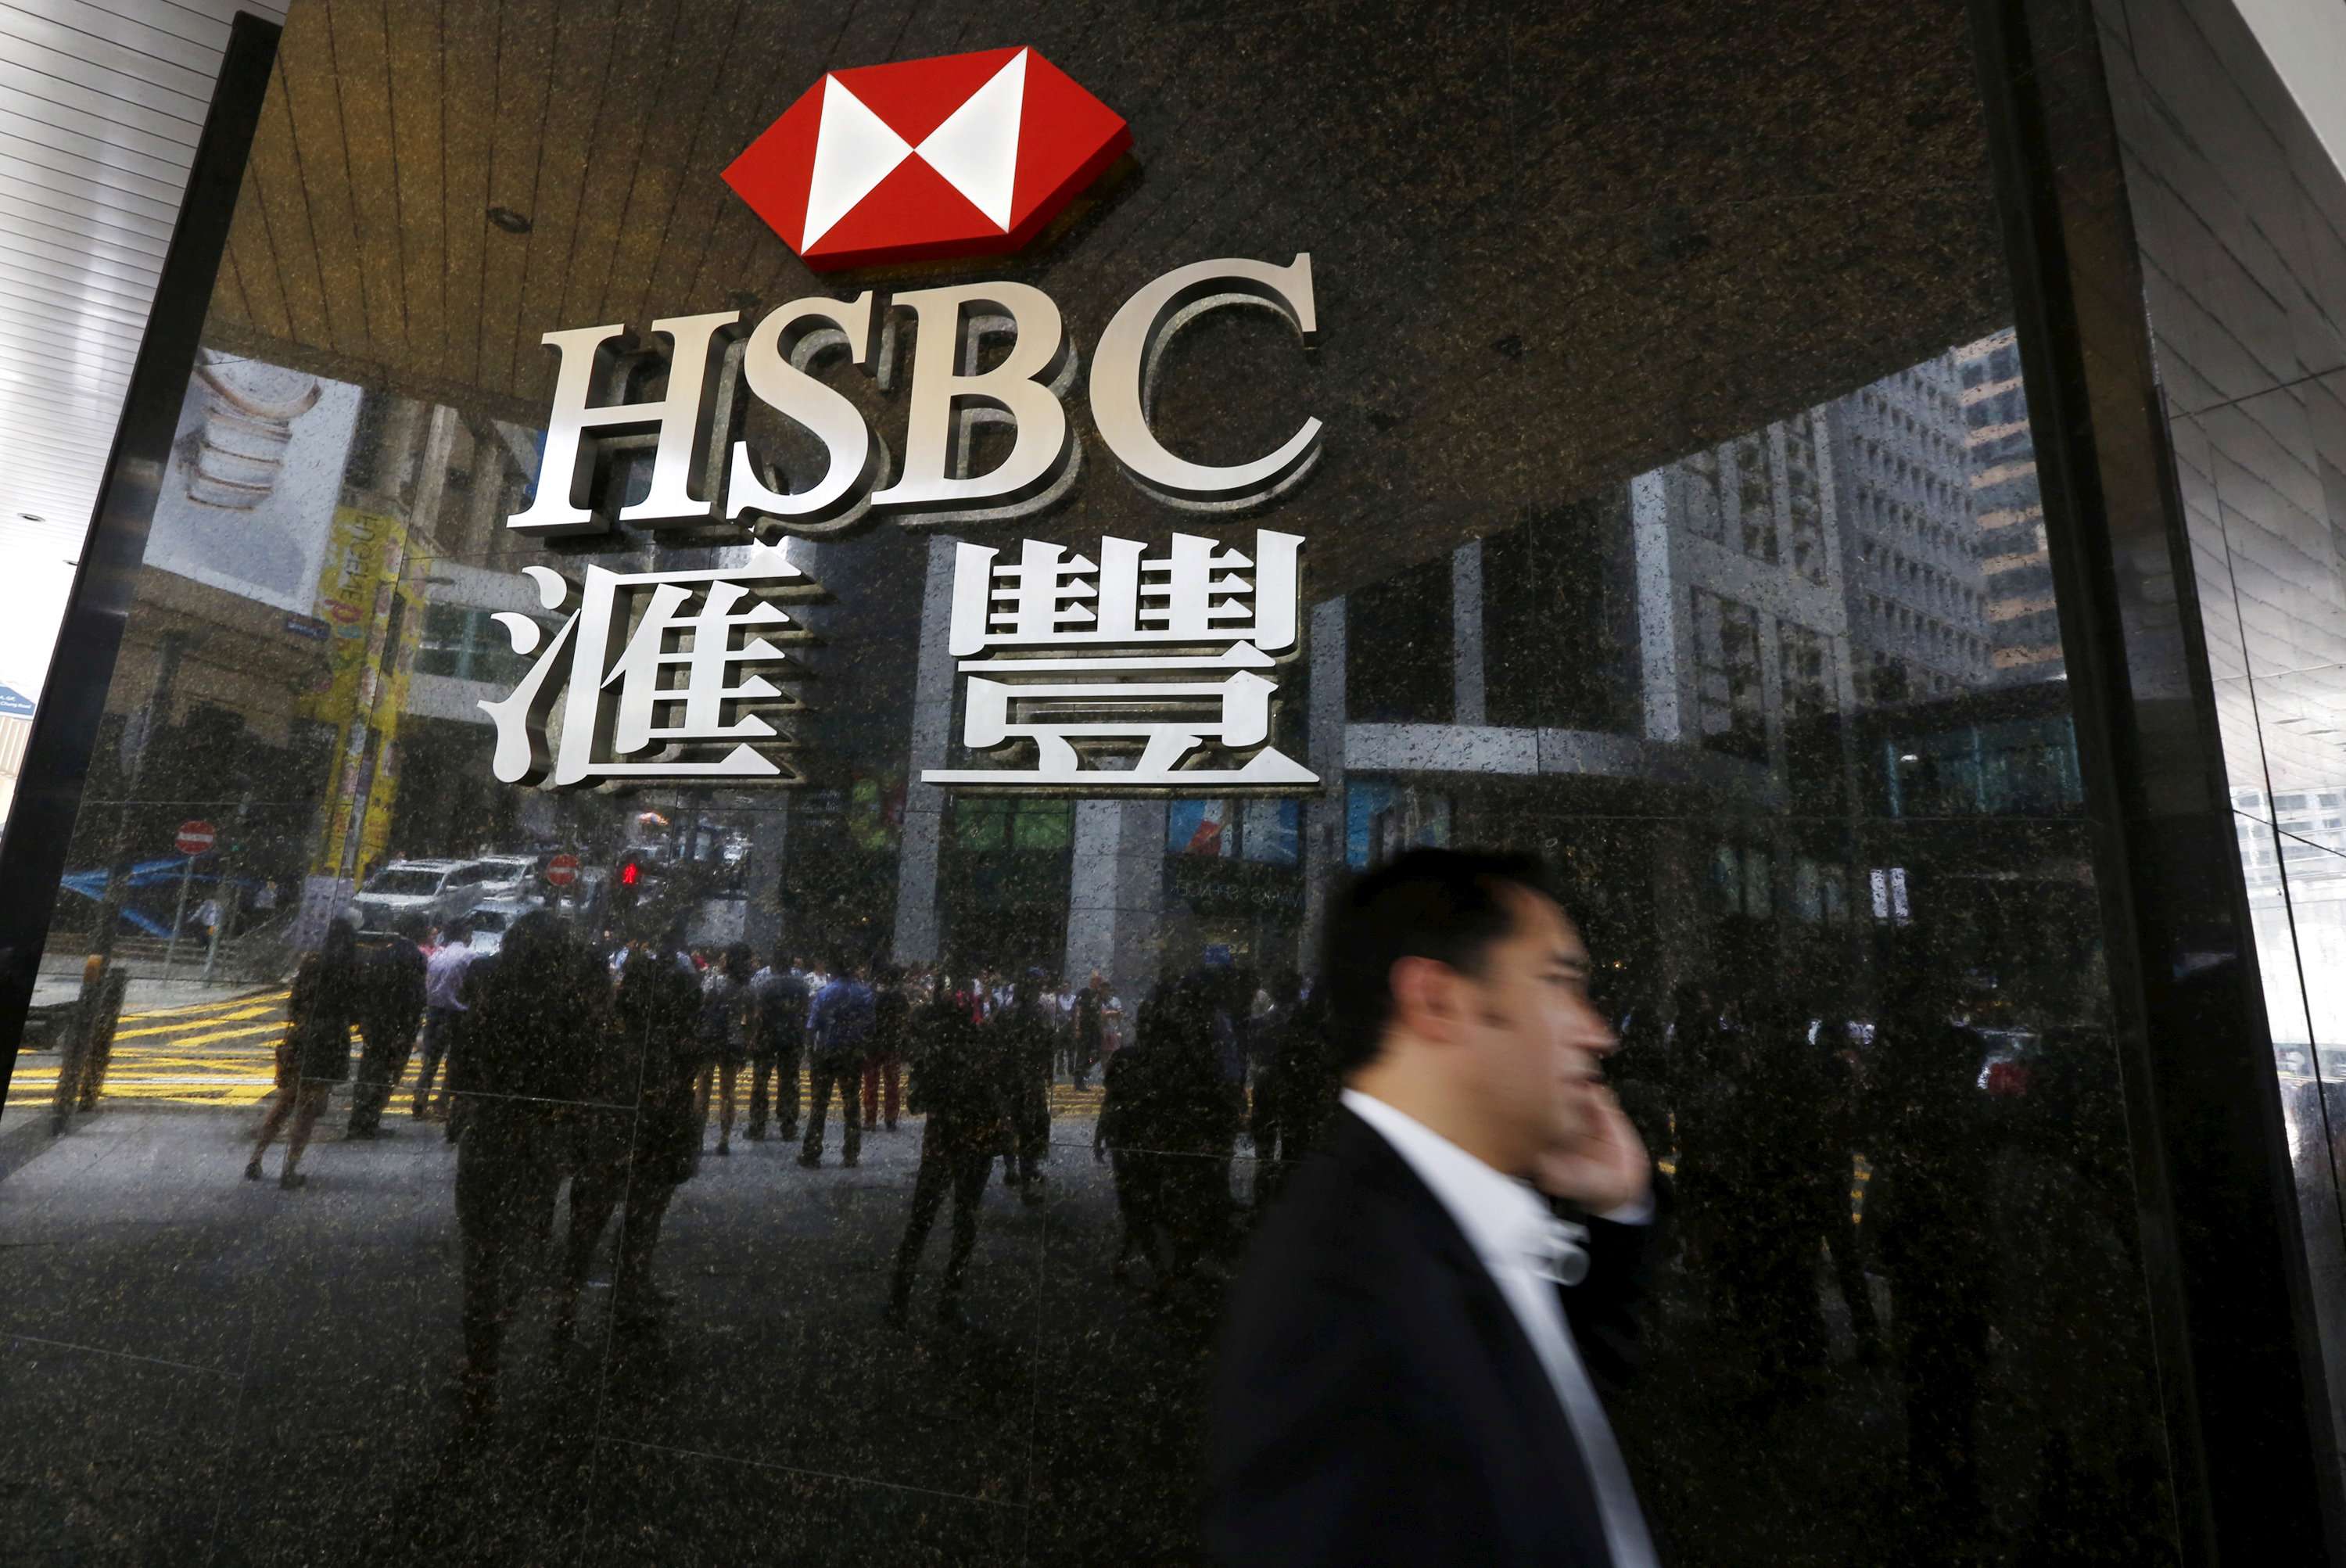 Hong Kong’s banks, which often follow the directives of the HKMAs, are exercising cautious in processing mortgage applications, even though they may be keepn to offer such loans. Photo: Reuters